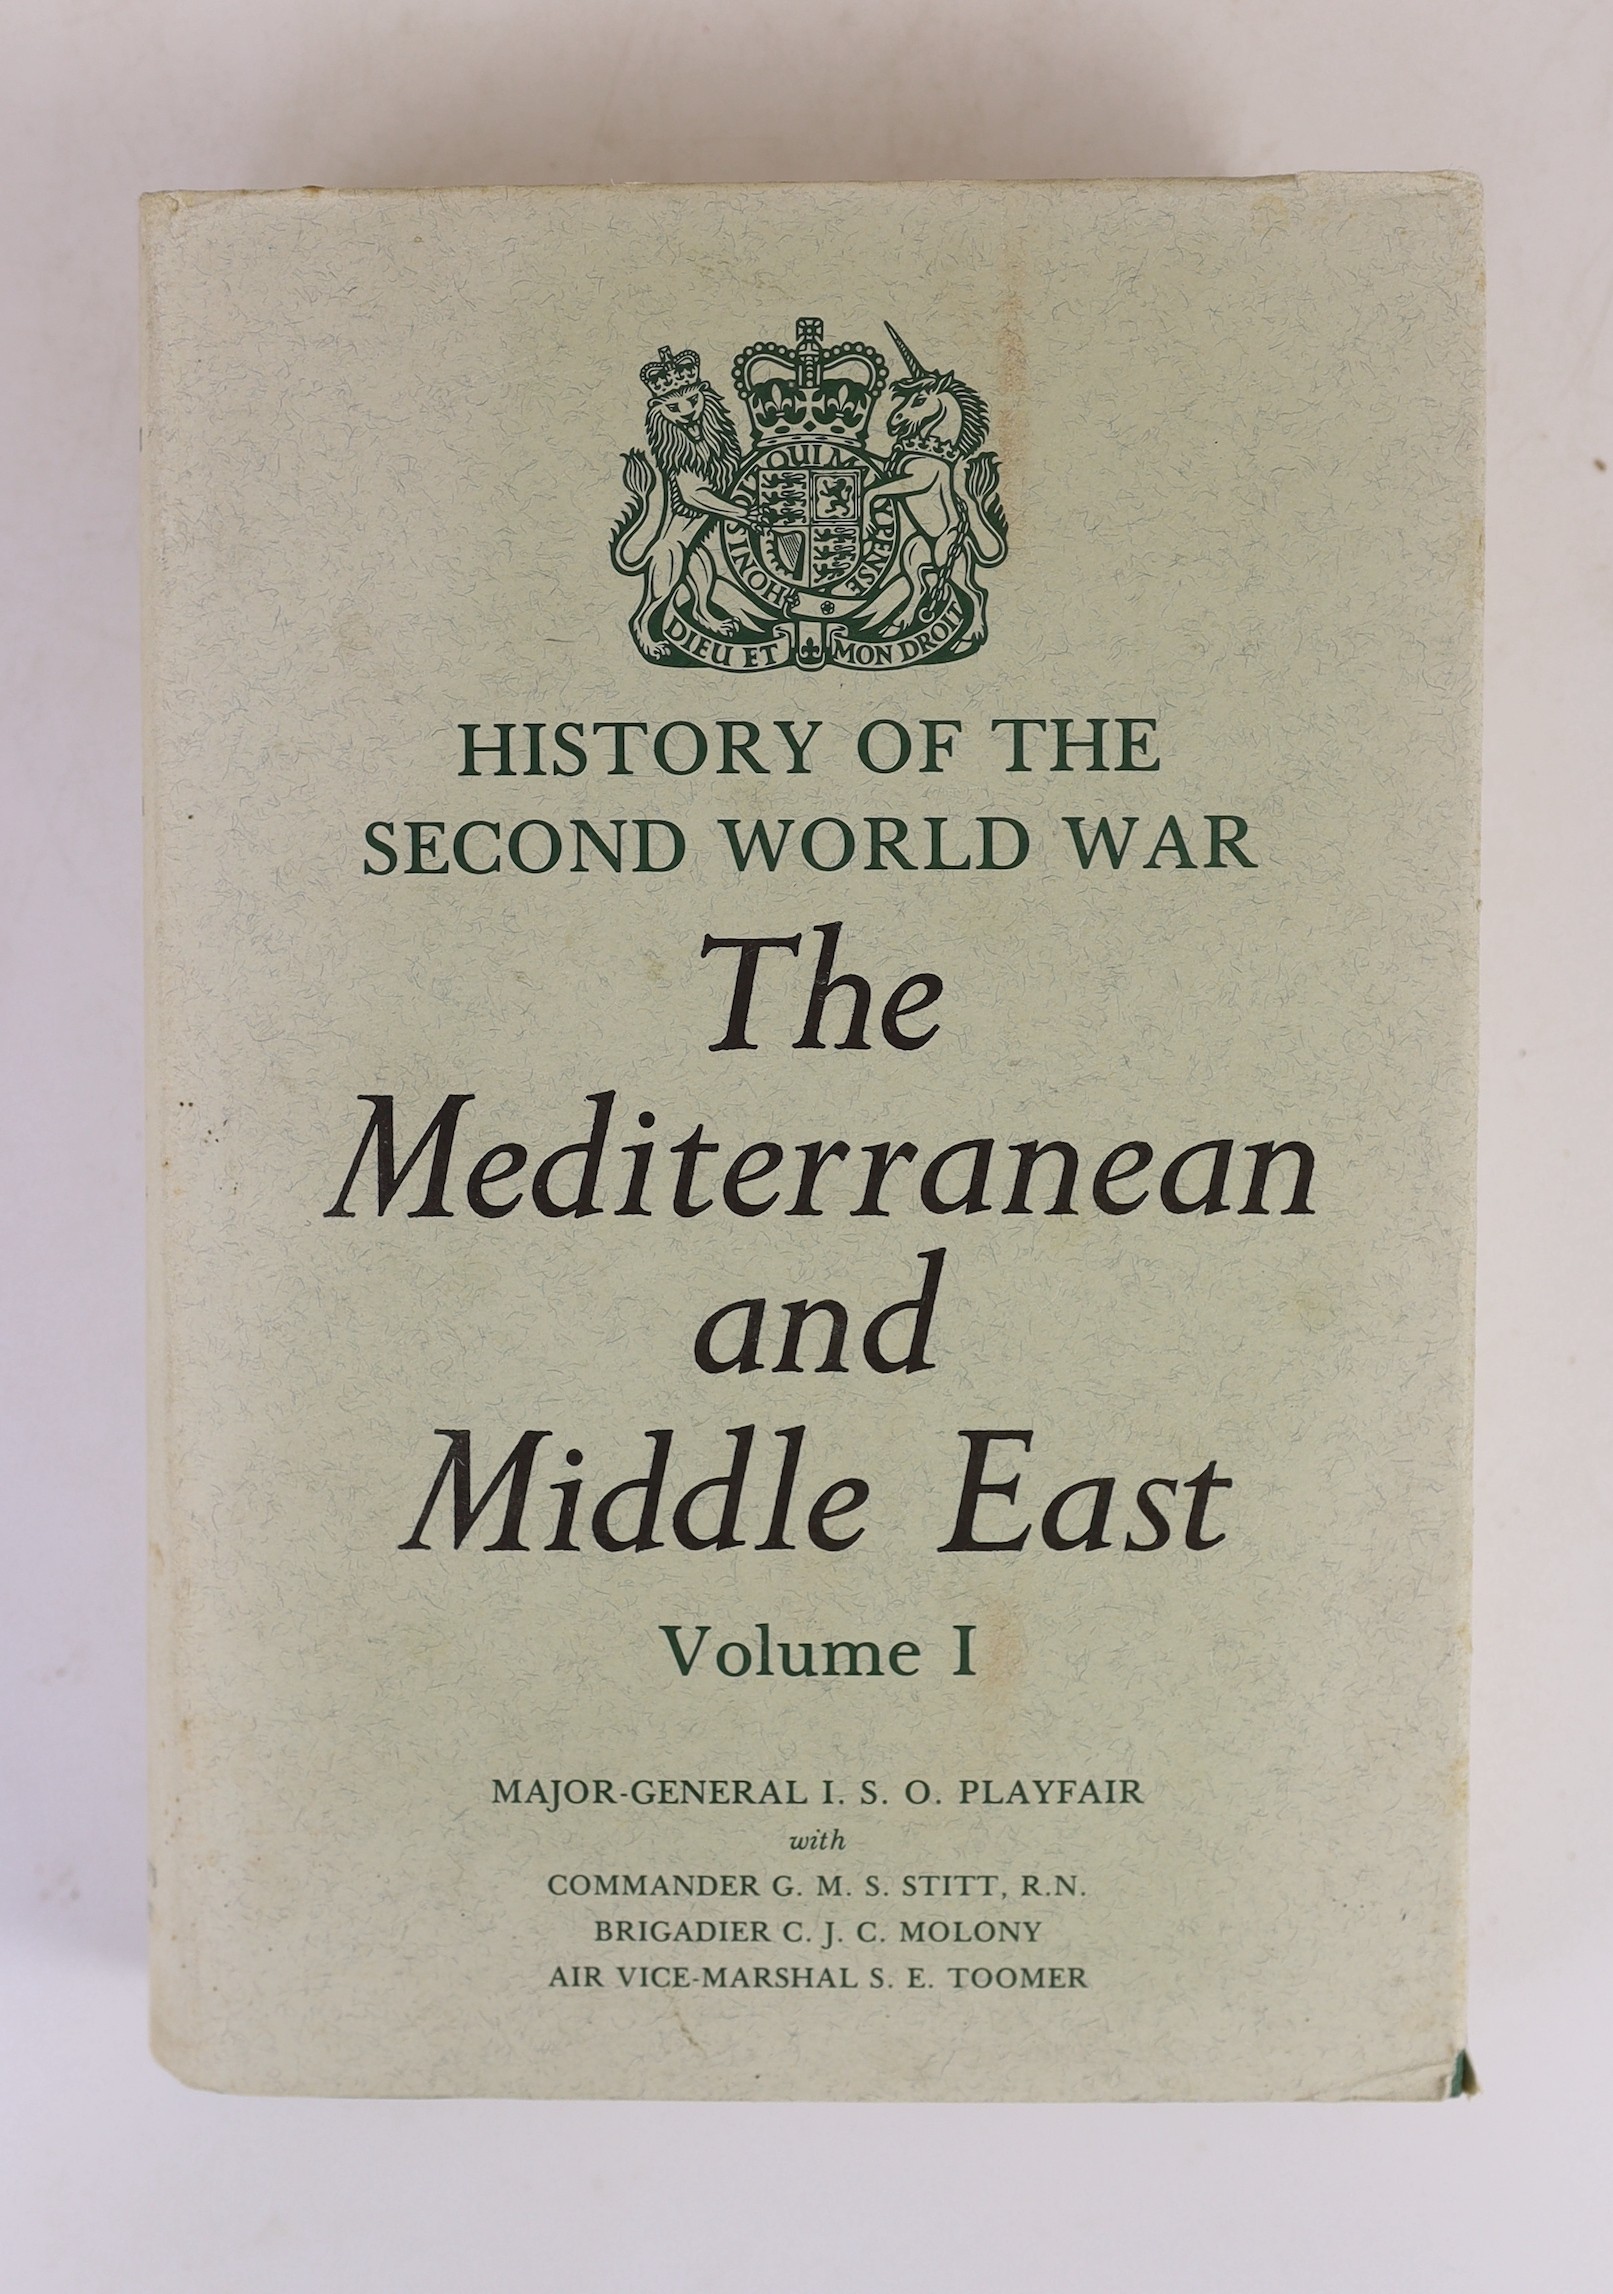 Playfair, S.O (Maj.-Gen) et al - History of the Second World War. The Mediterranean and the Middle East, 6 vols in 8, 8vo, cloth with d/j’s, 4 vols with library stickers to front fly leaves, HMSO, London, 1954-1988